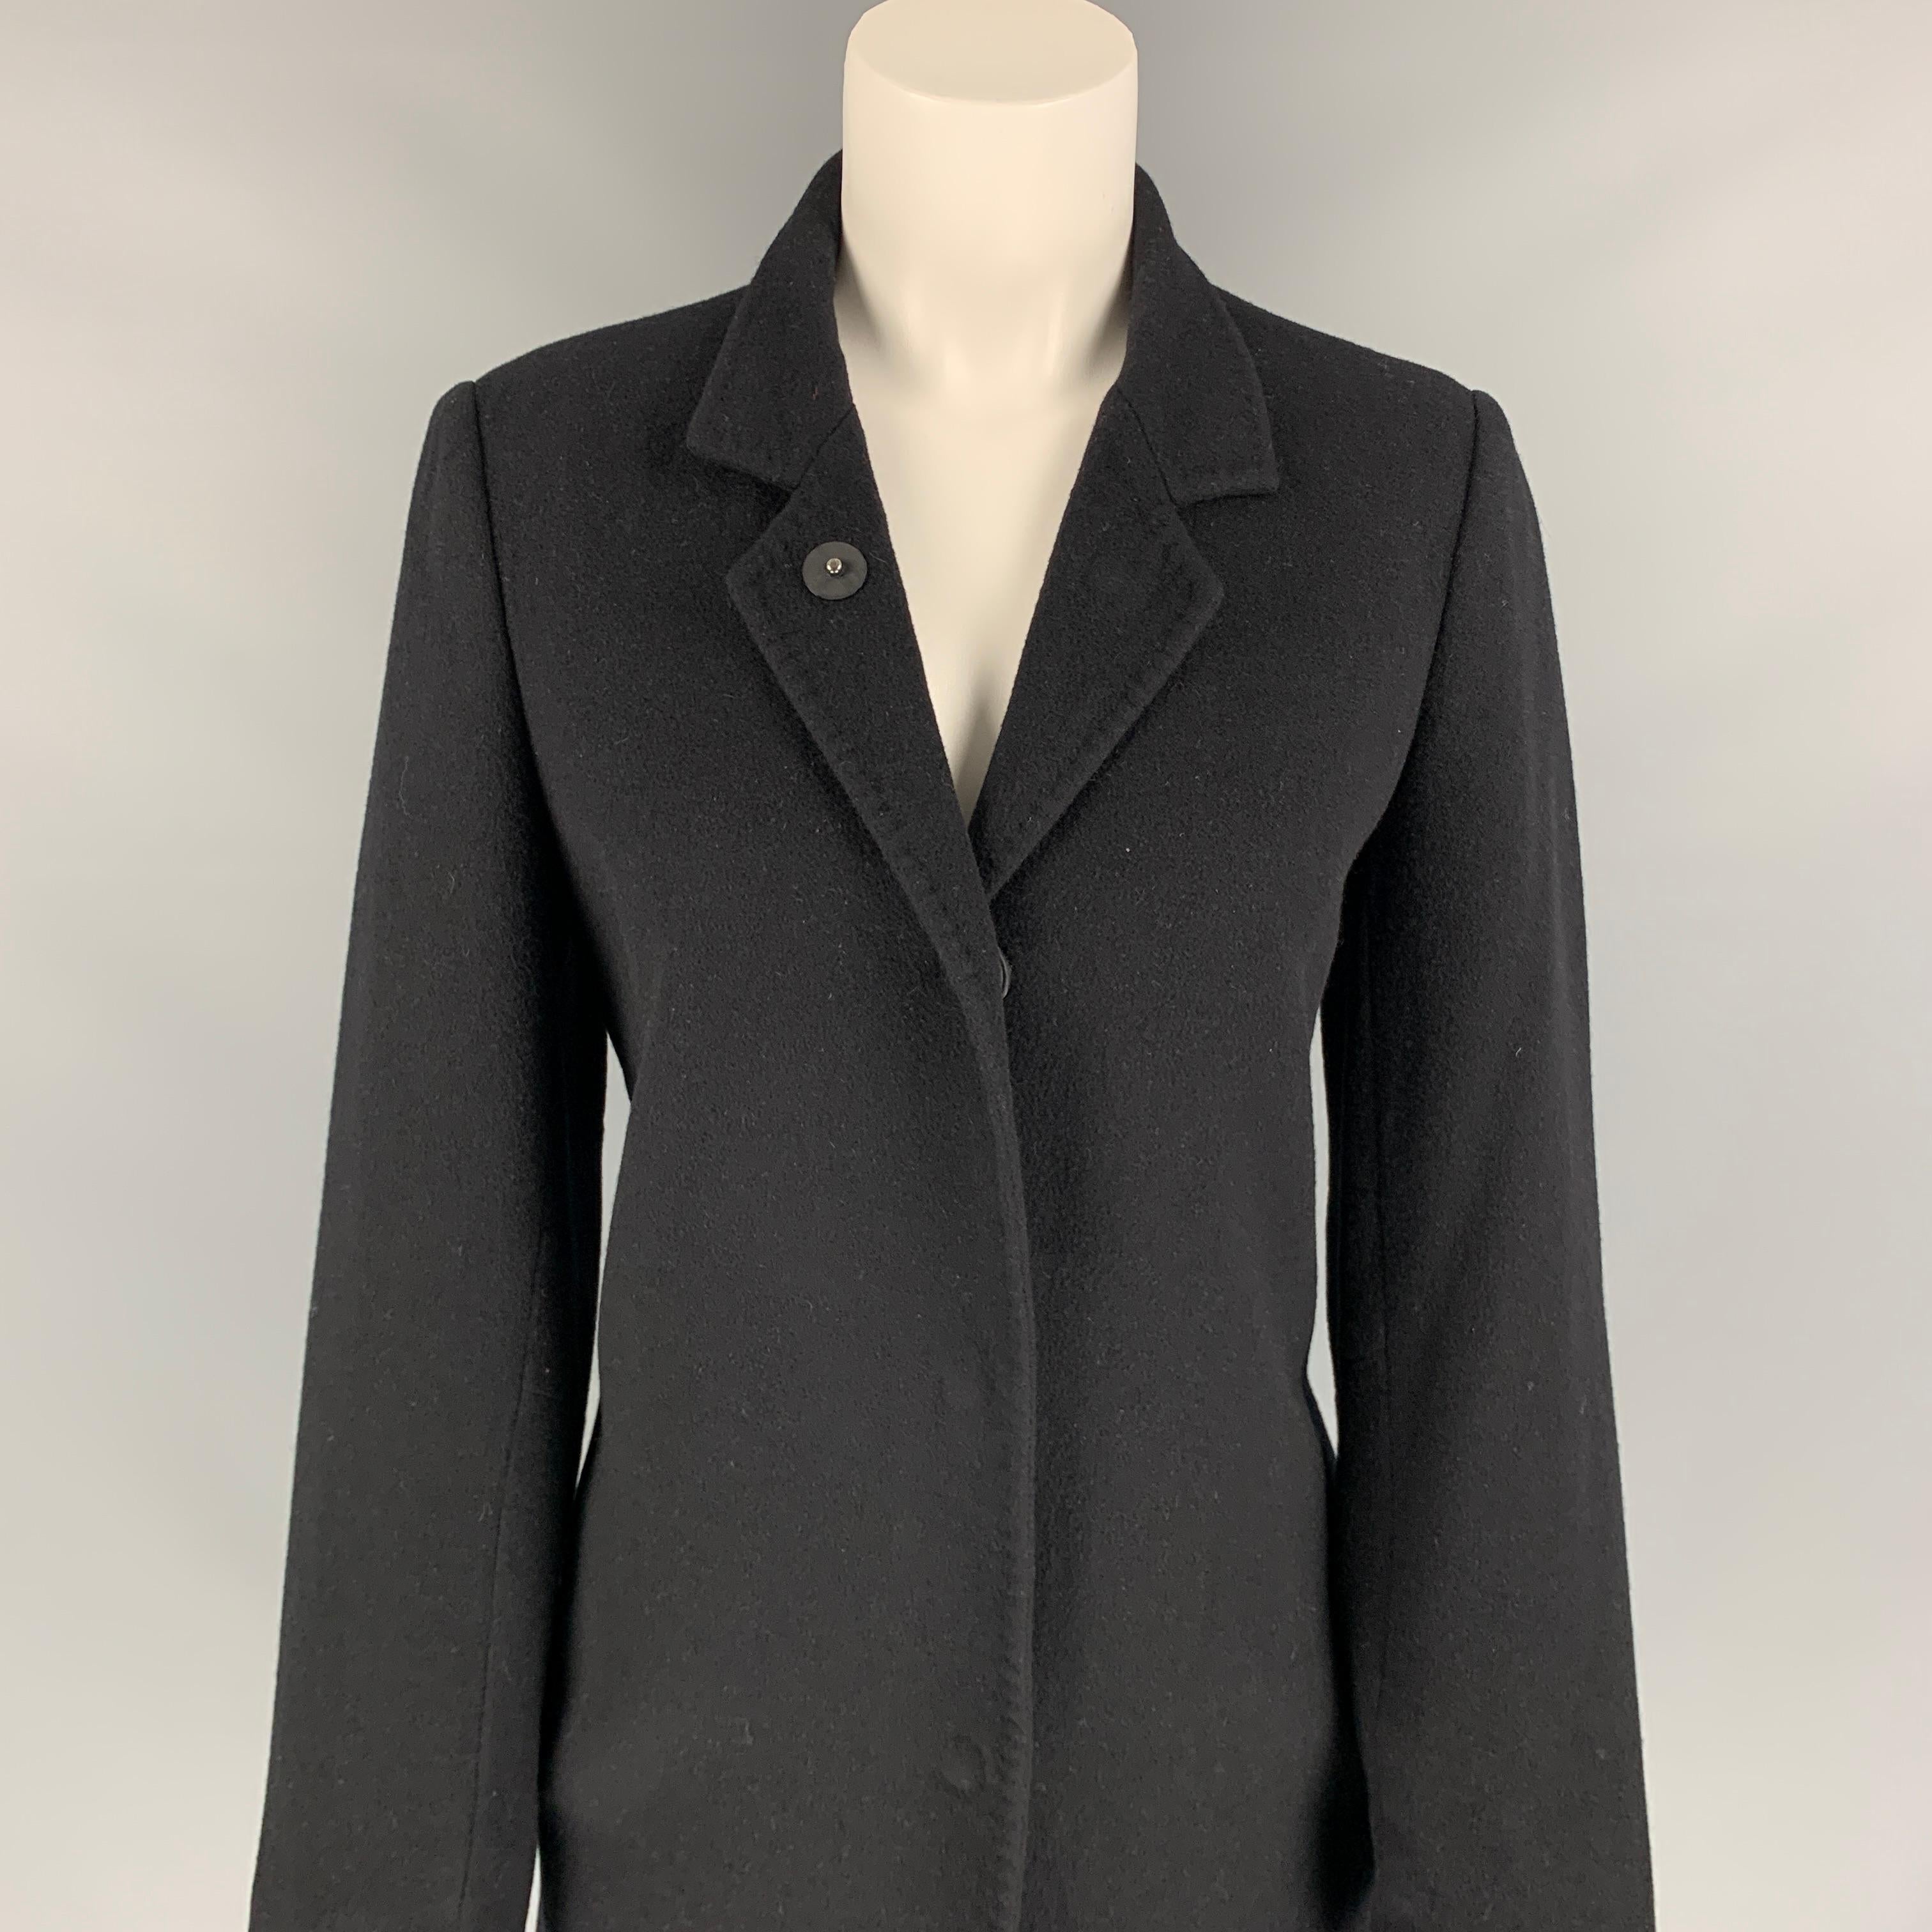 LAN JAENICKE coat comes in a black cashmere with a full liner featuring slit pockets, single back vent, and a hidden snap button closure. 

Very Good Pre-Owned Condition.
Marked: 2

Measurements:

Shoulder: 16 in.
Bust: 36 in.
Sleeve: 24 in.
Length: